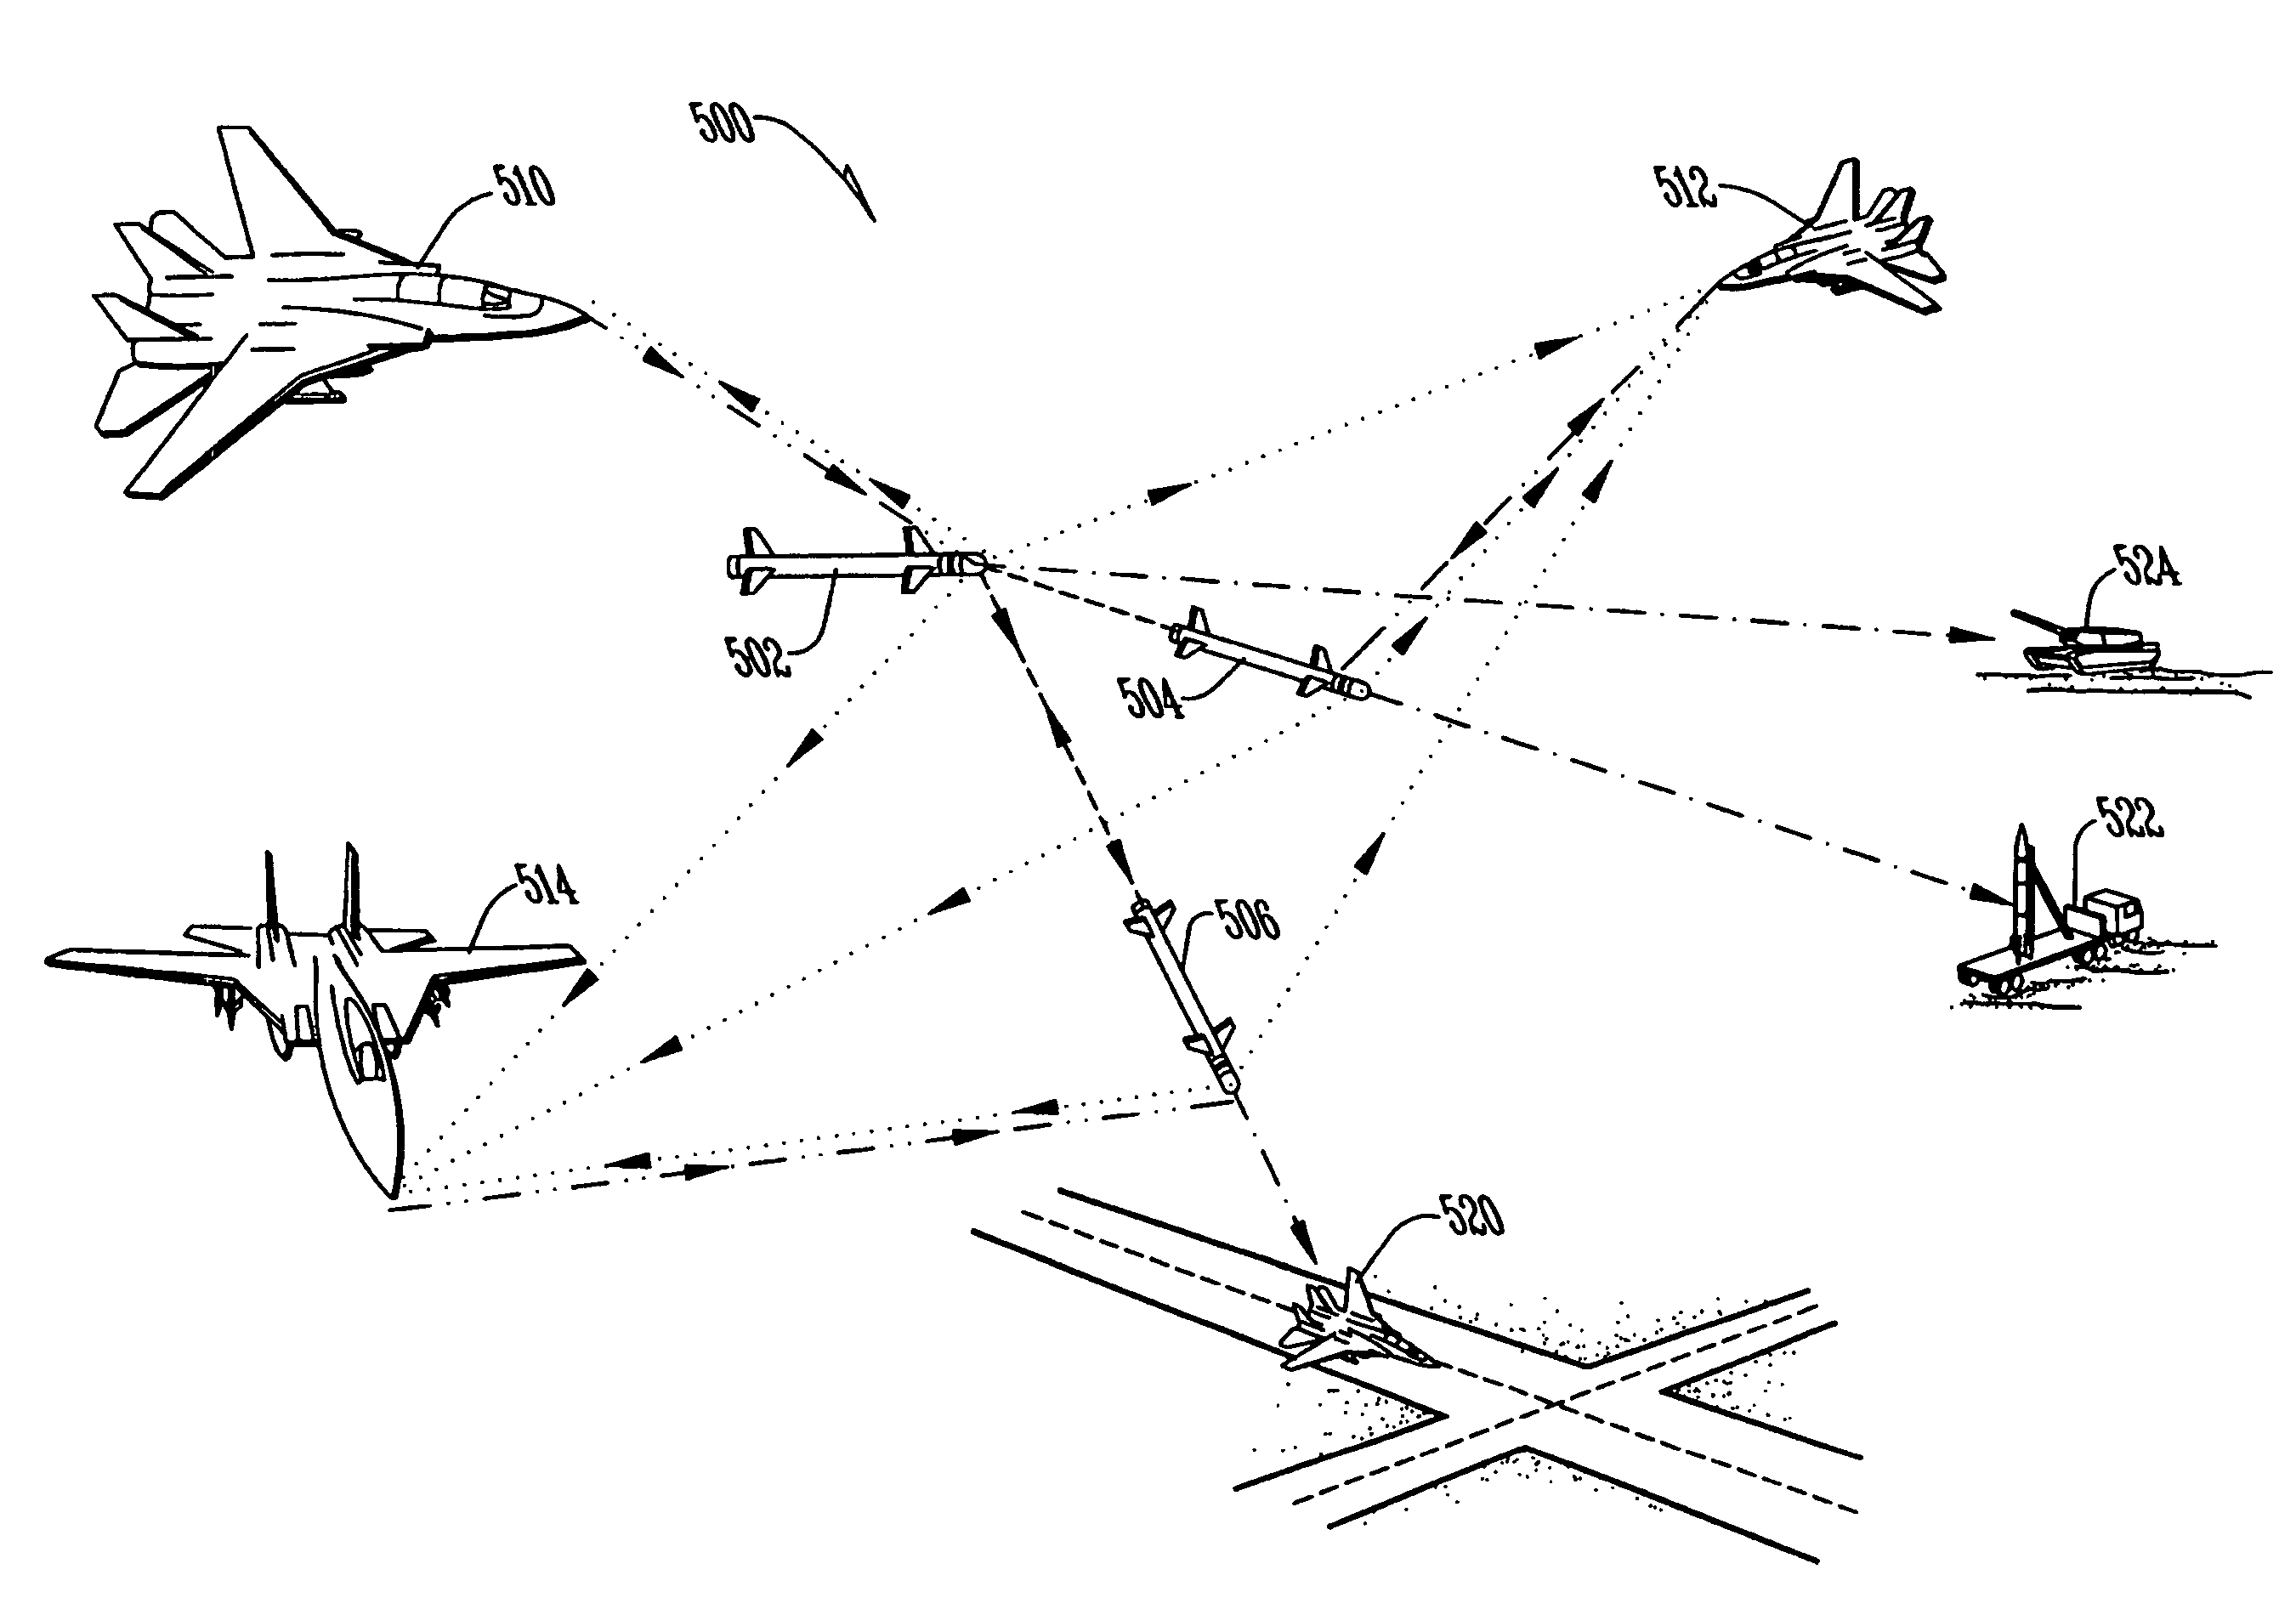 System and method for communicating with airborne weapons platforms